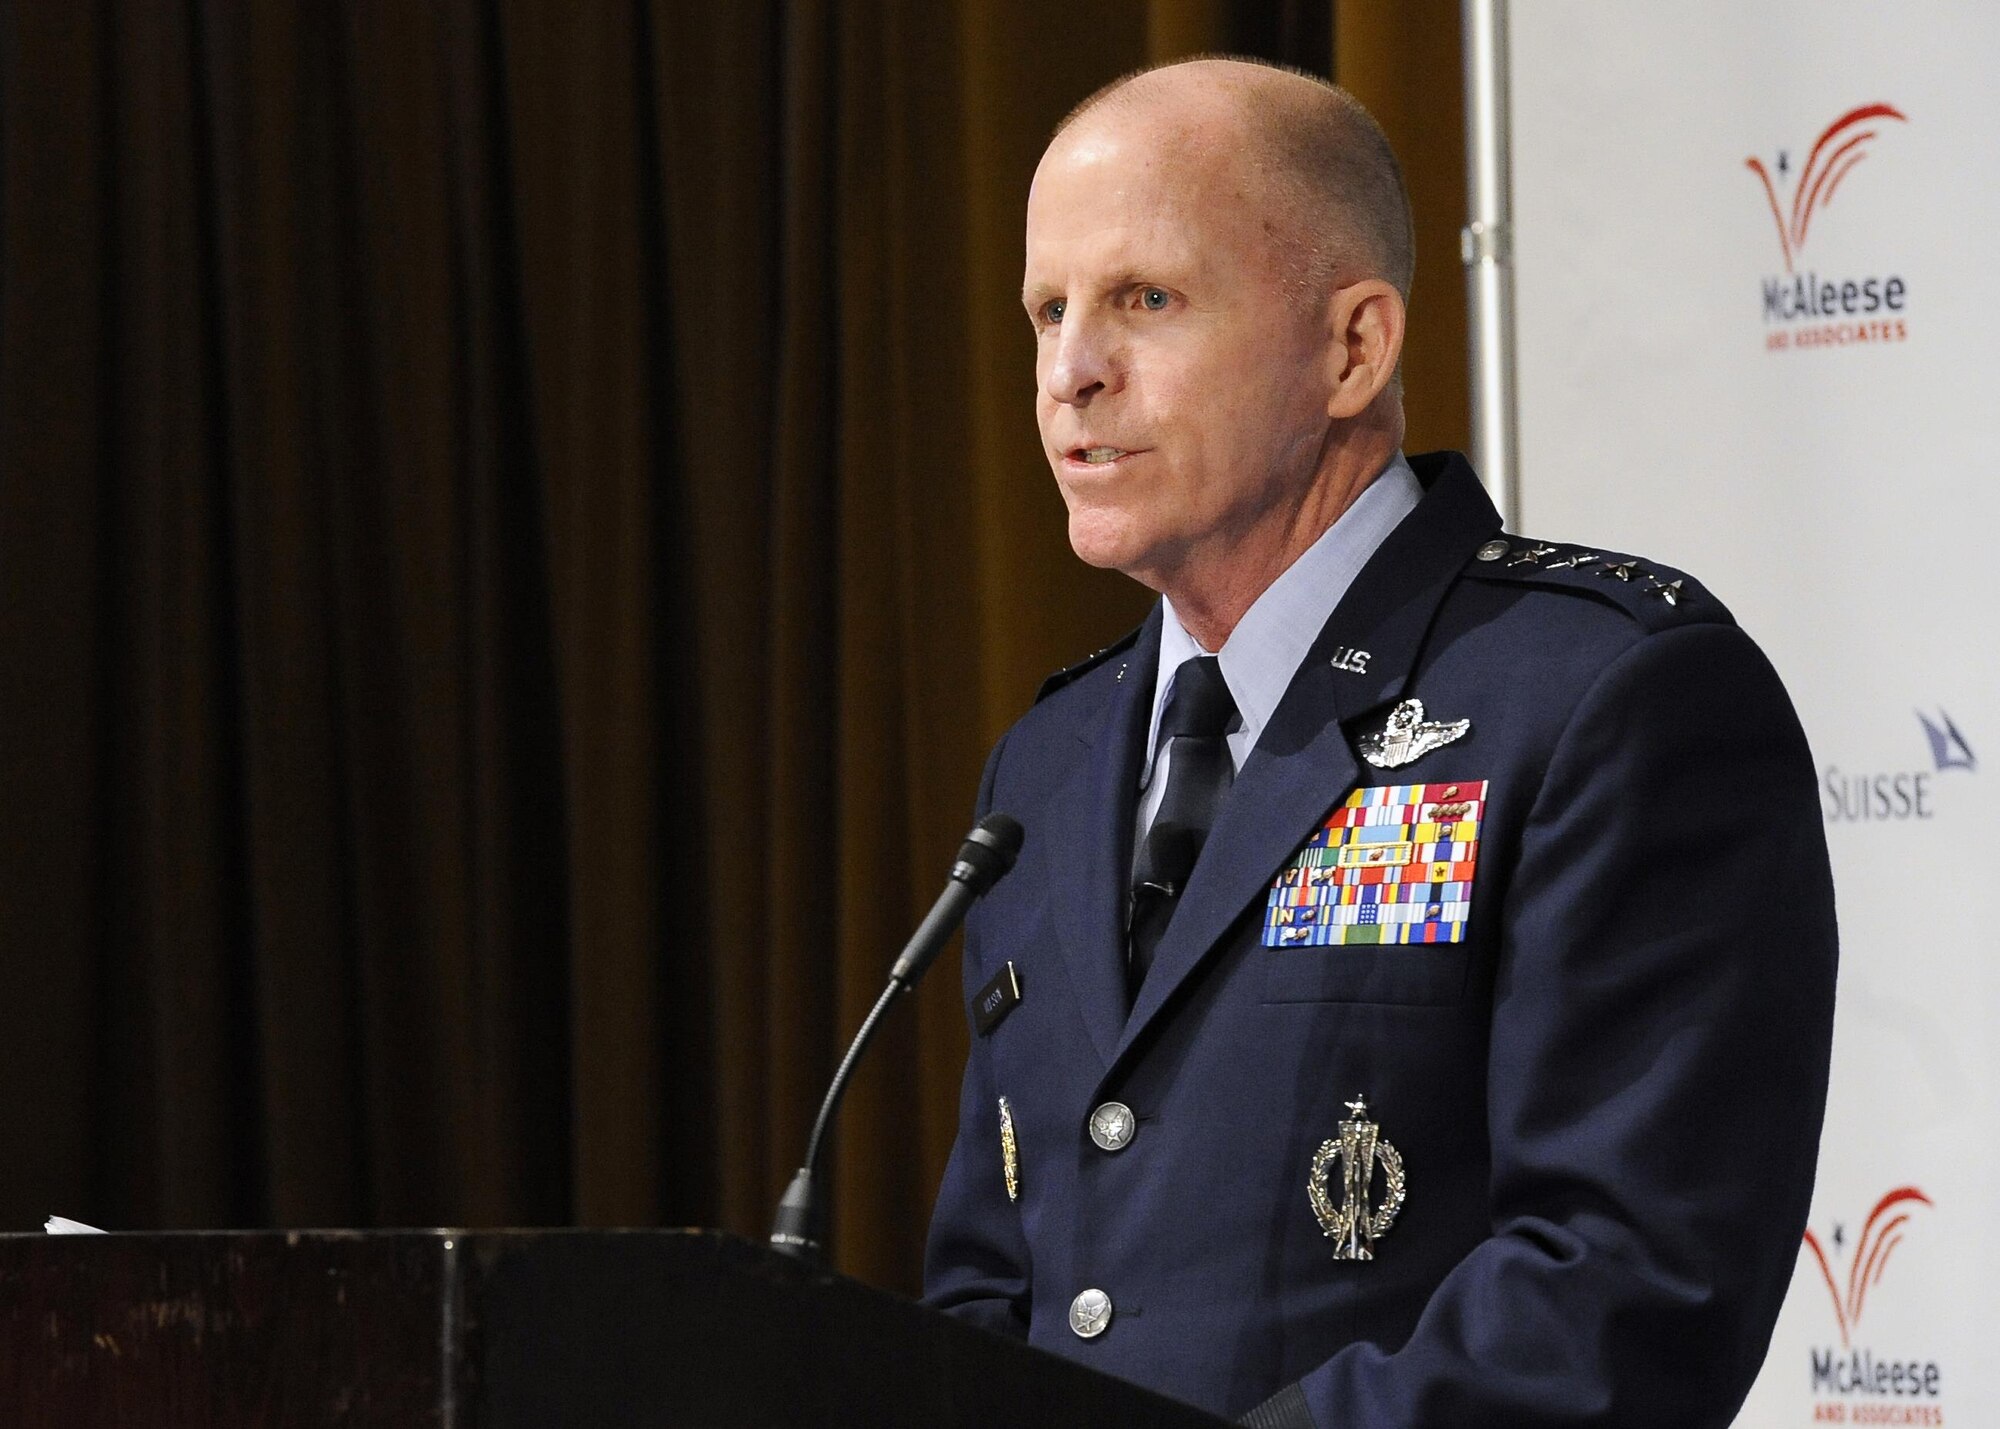 Air Force Vice Chief of Staff Gen. Stephen Wilson, speaks during the eighth annual McAleese/Credit Suisse "Defense Programs" conference March 22, 2017, in Washington, D.C. During the conference, Wilson discussed readiness, force structure and modernization of the Air Force. (U.S. Air Force photo/Staff Sgt. Jannelle McRae)